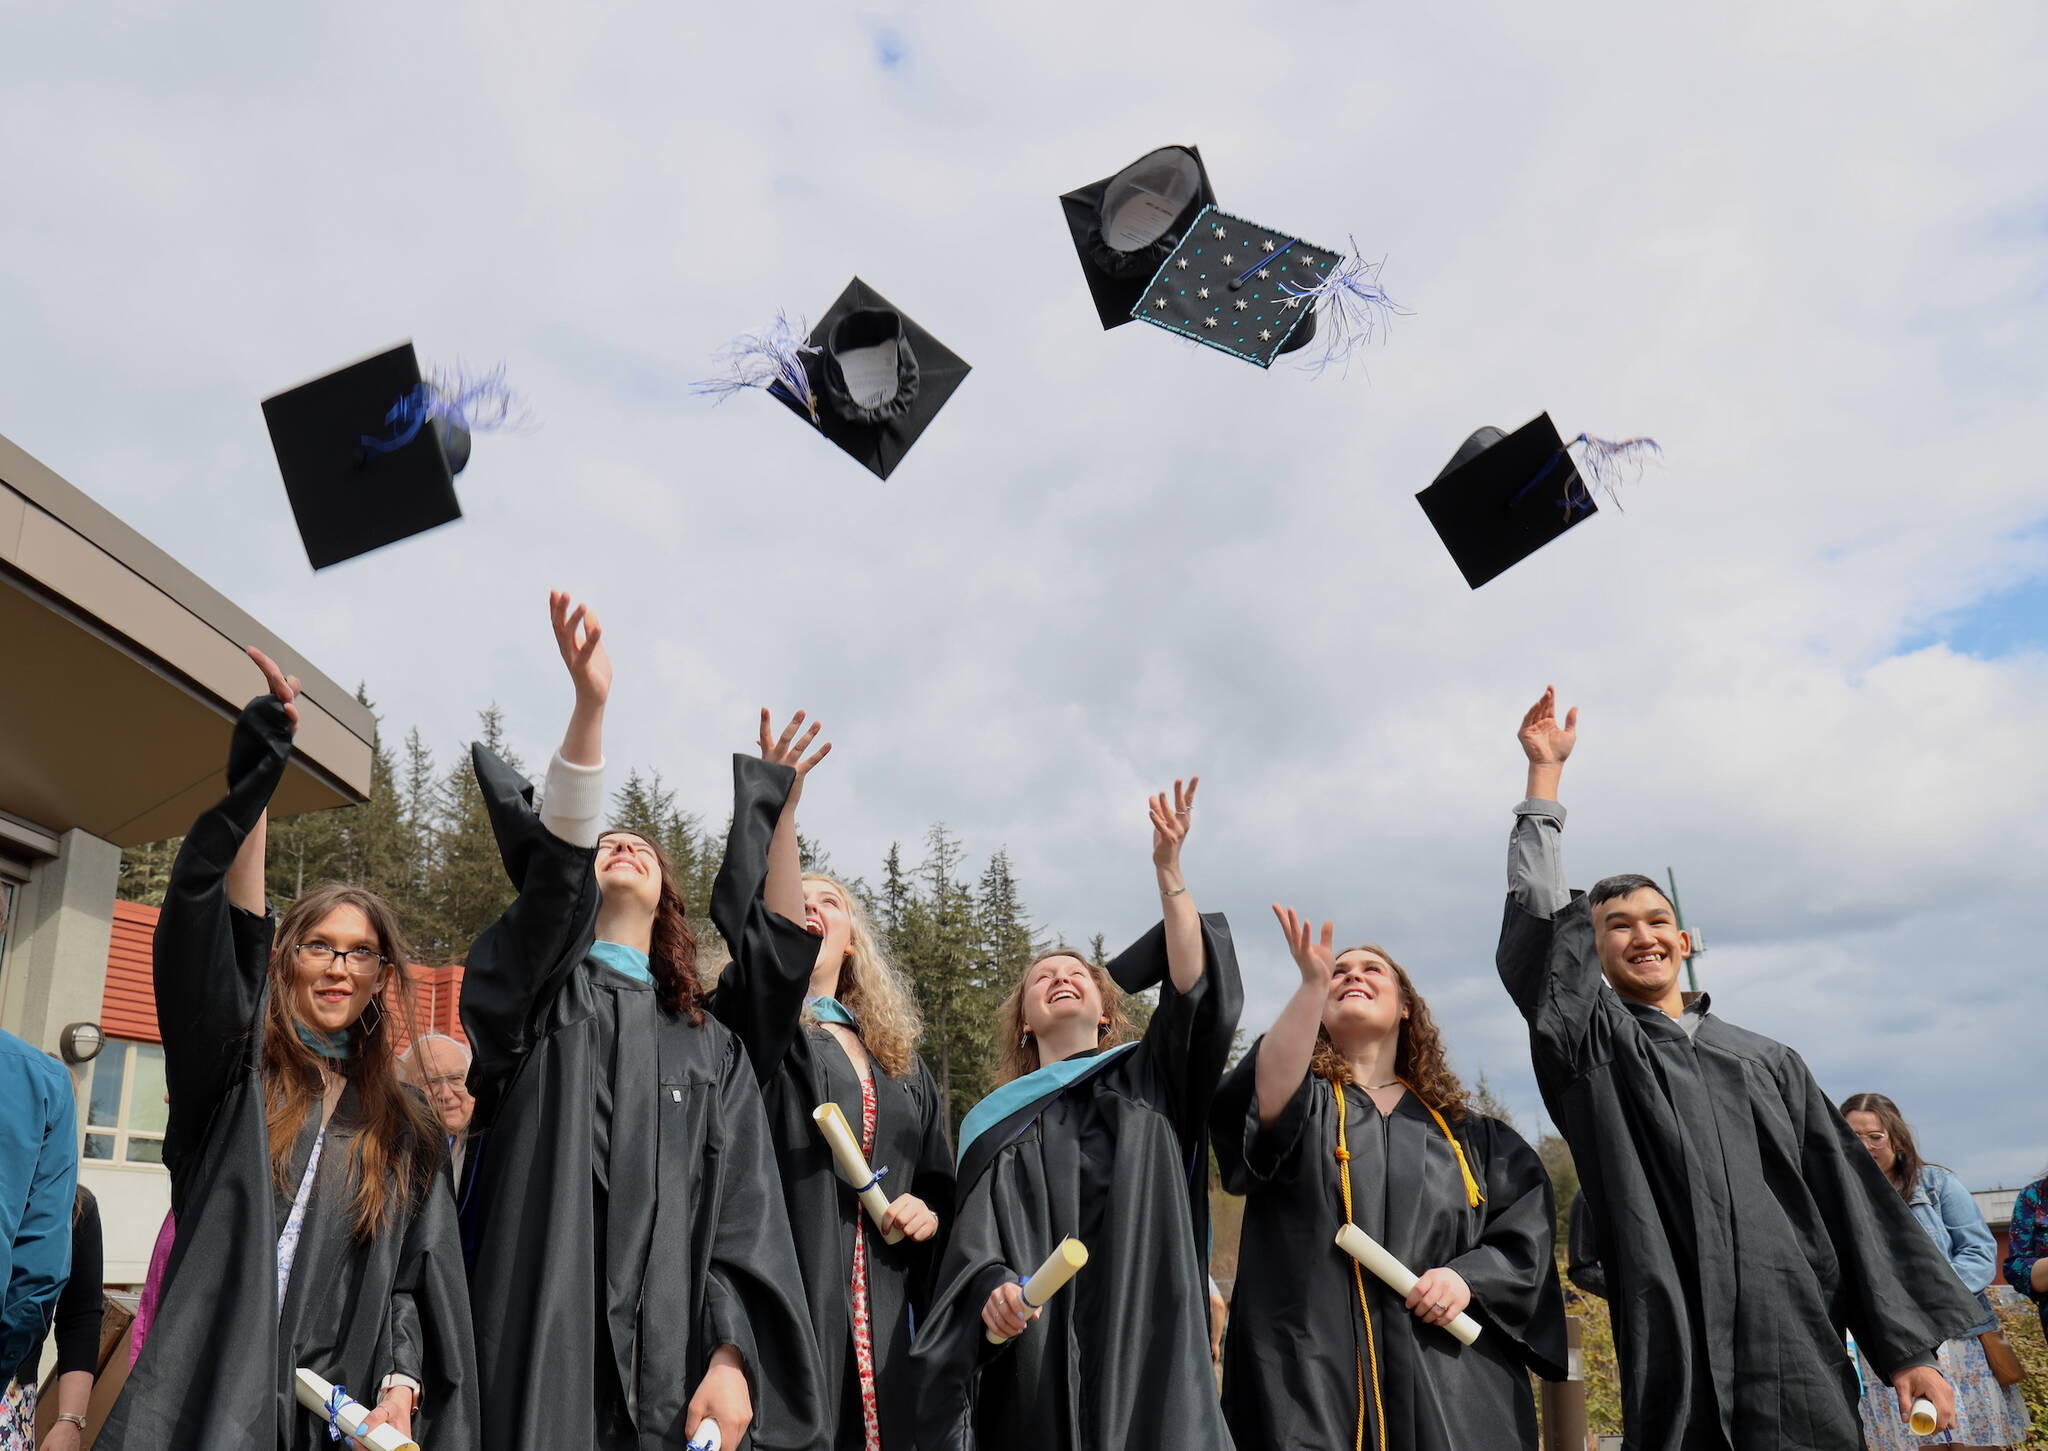 Graduates Emily Hatley, Lara Millette, Autumn Levy, Rosaline Westfall, Rylee Johnson and Jarvis Evans throw their caps in the air after the commencement ceremony held Sunday afternoon at the University of Alaska Southeast. (Clarise Larson / Juneau Empire)